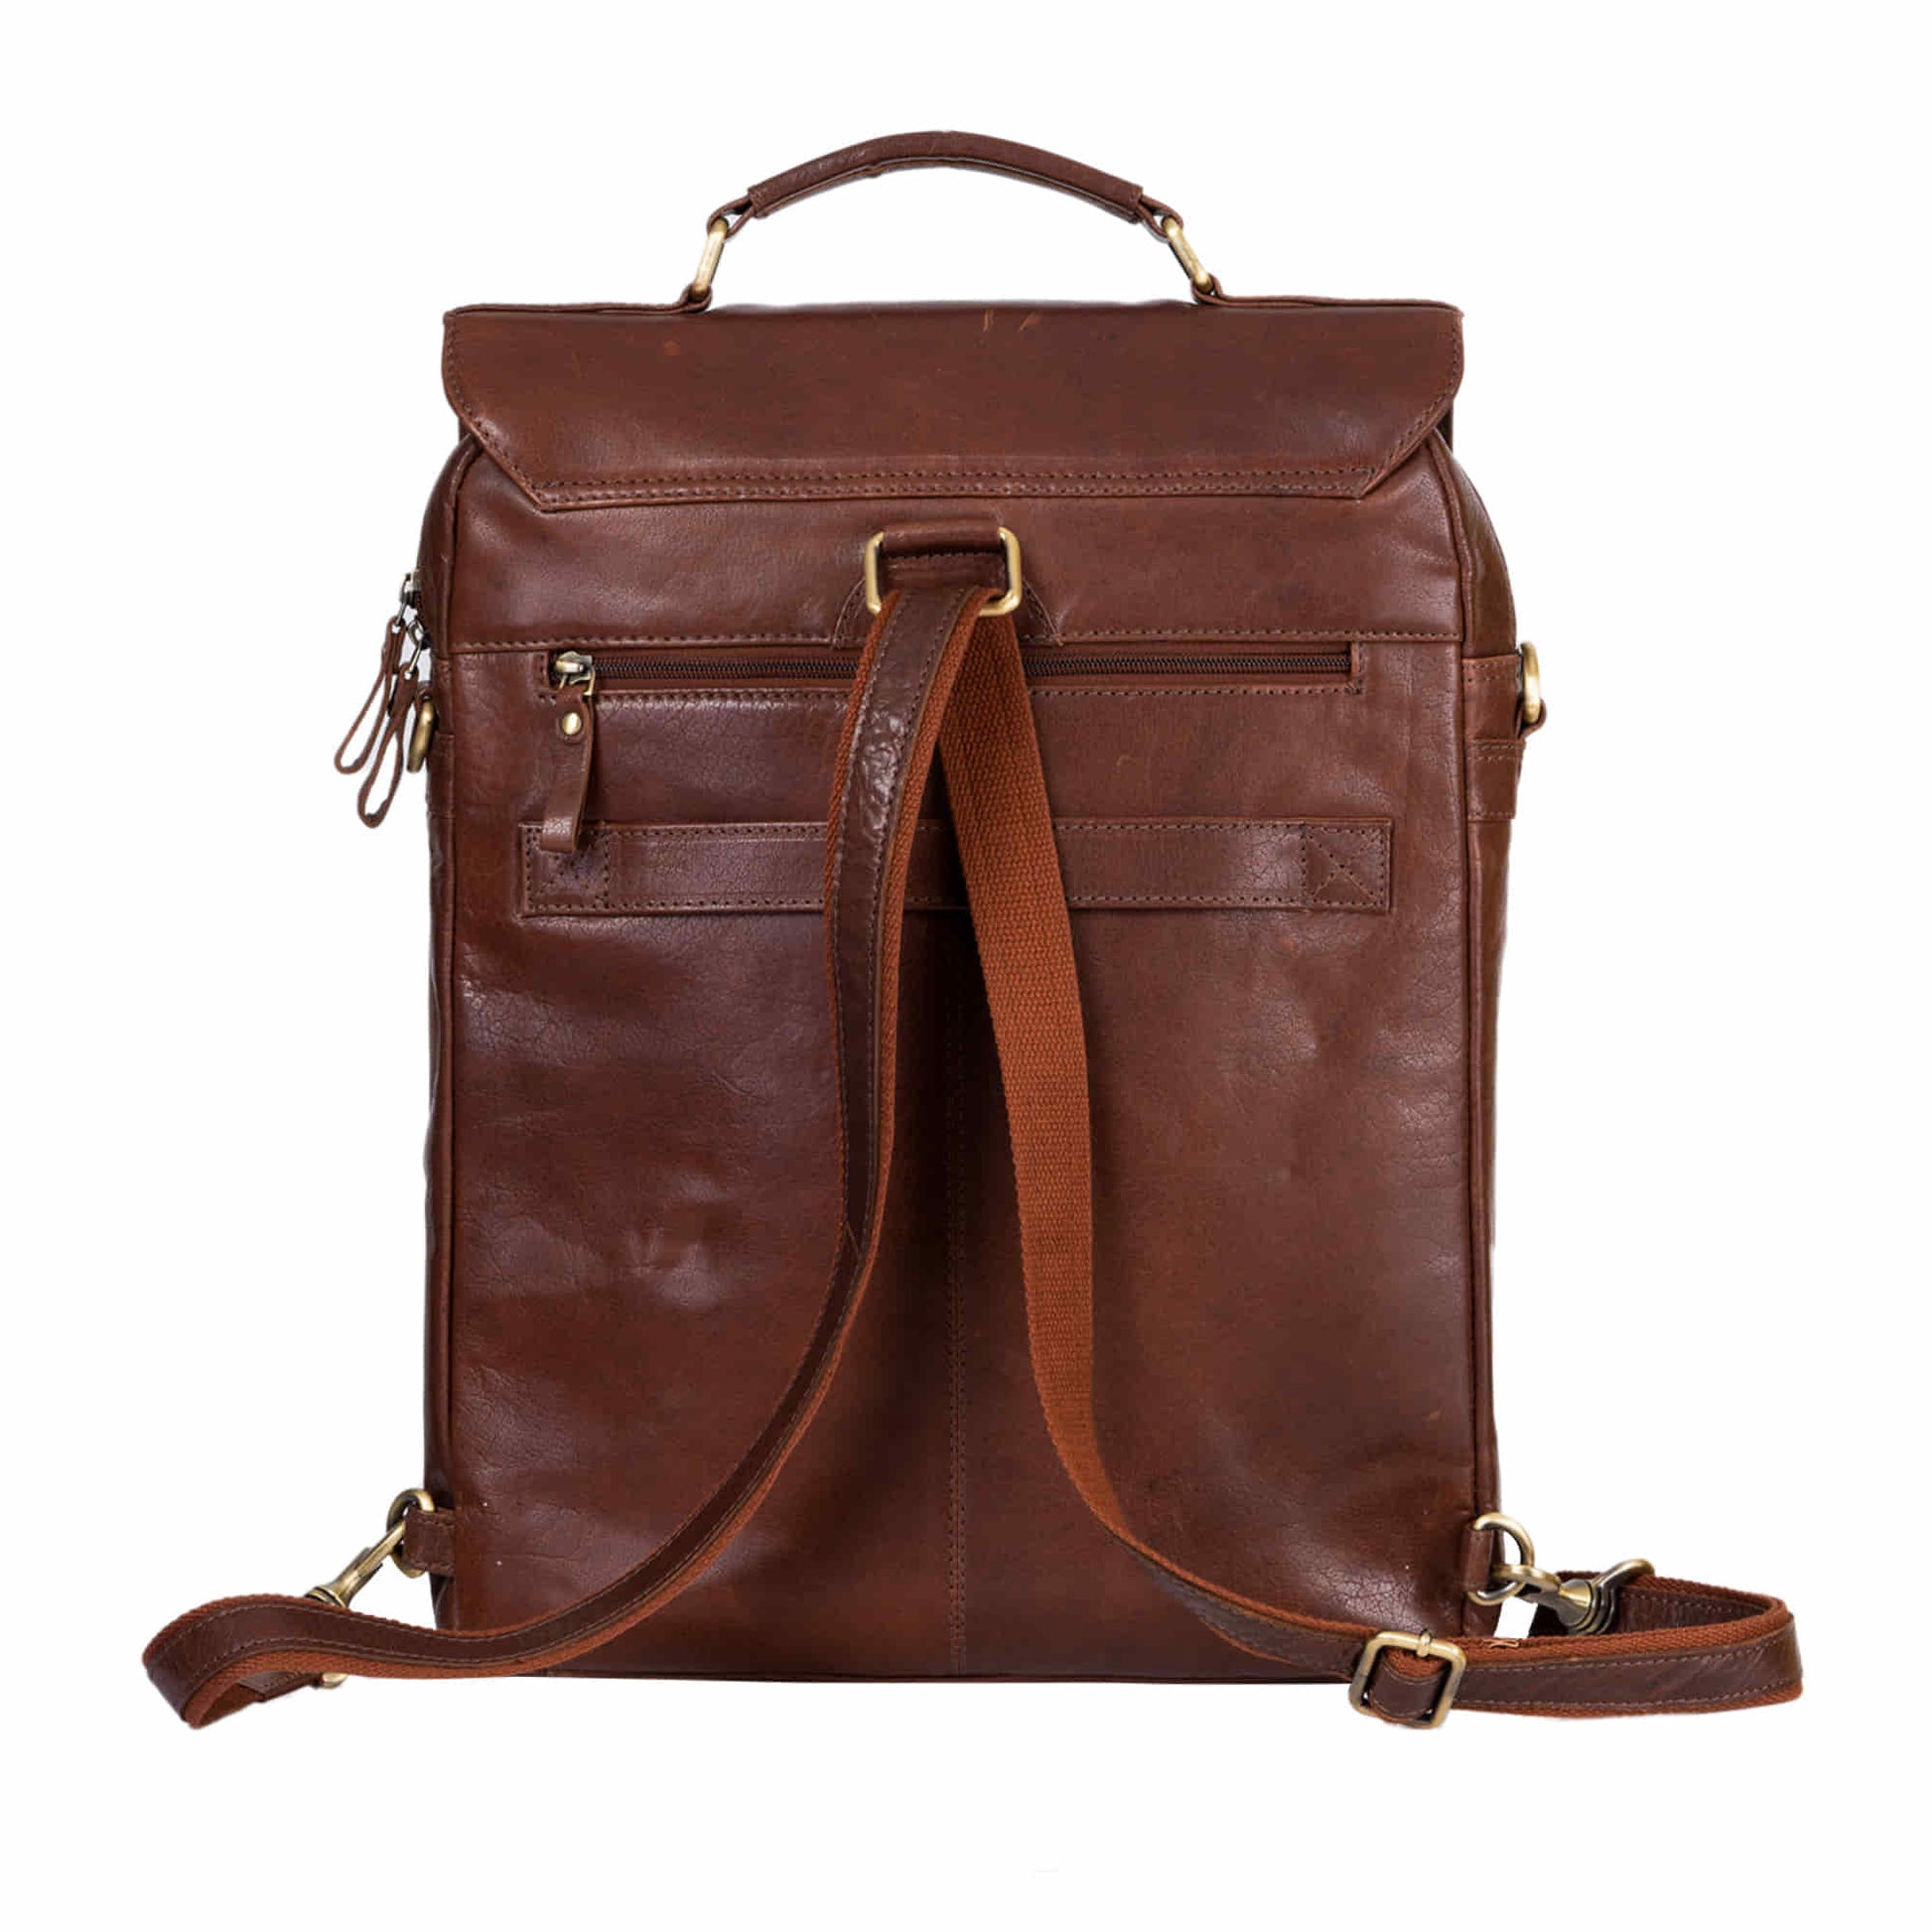 Style n Craft 392600 Cross Body Messenger Bag & Backpack in Full Grain Dark Brown Vintage Leather - Back View showing the looping of the detachable & adjustable leather strap to use the bag as a backpack